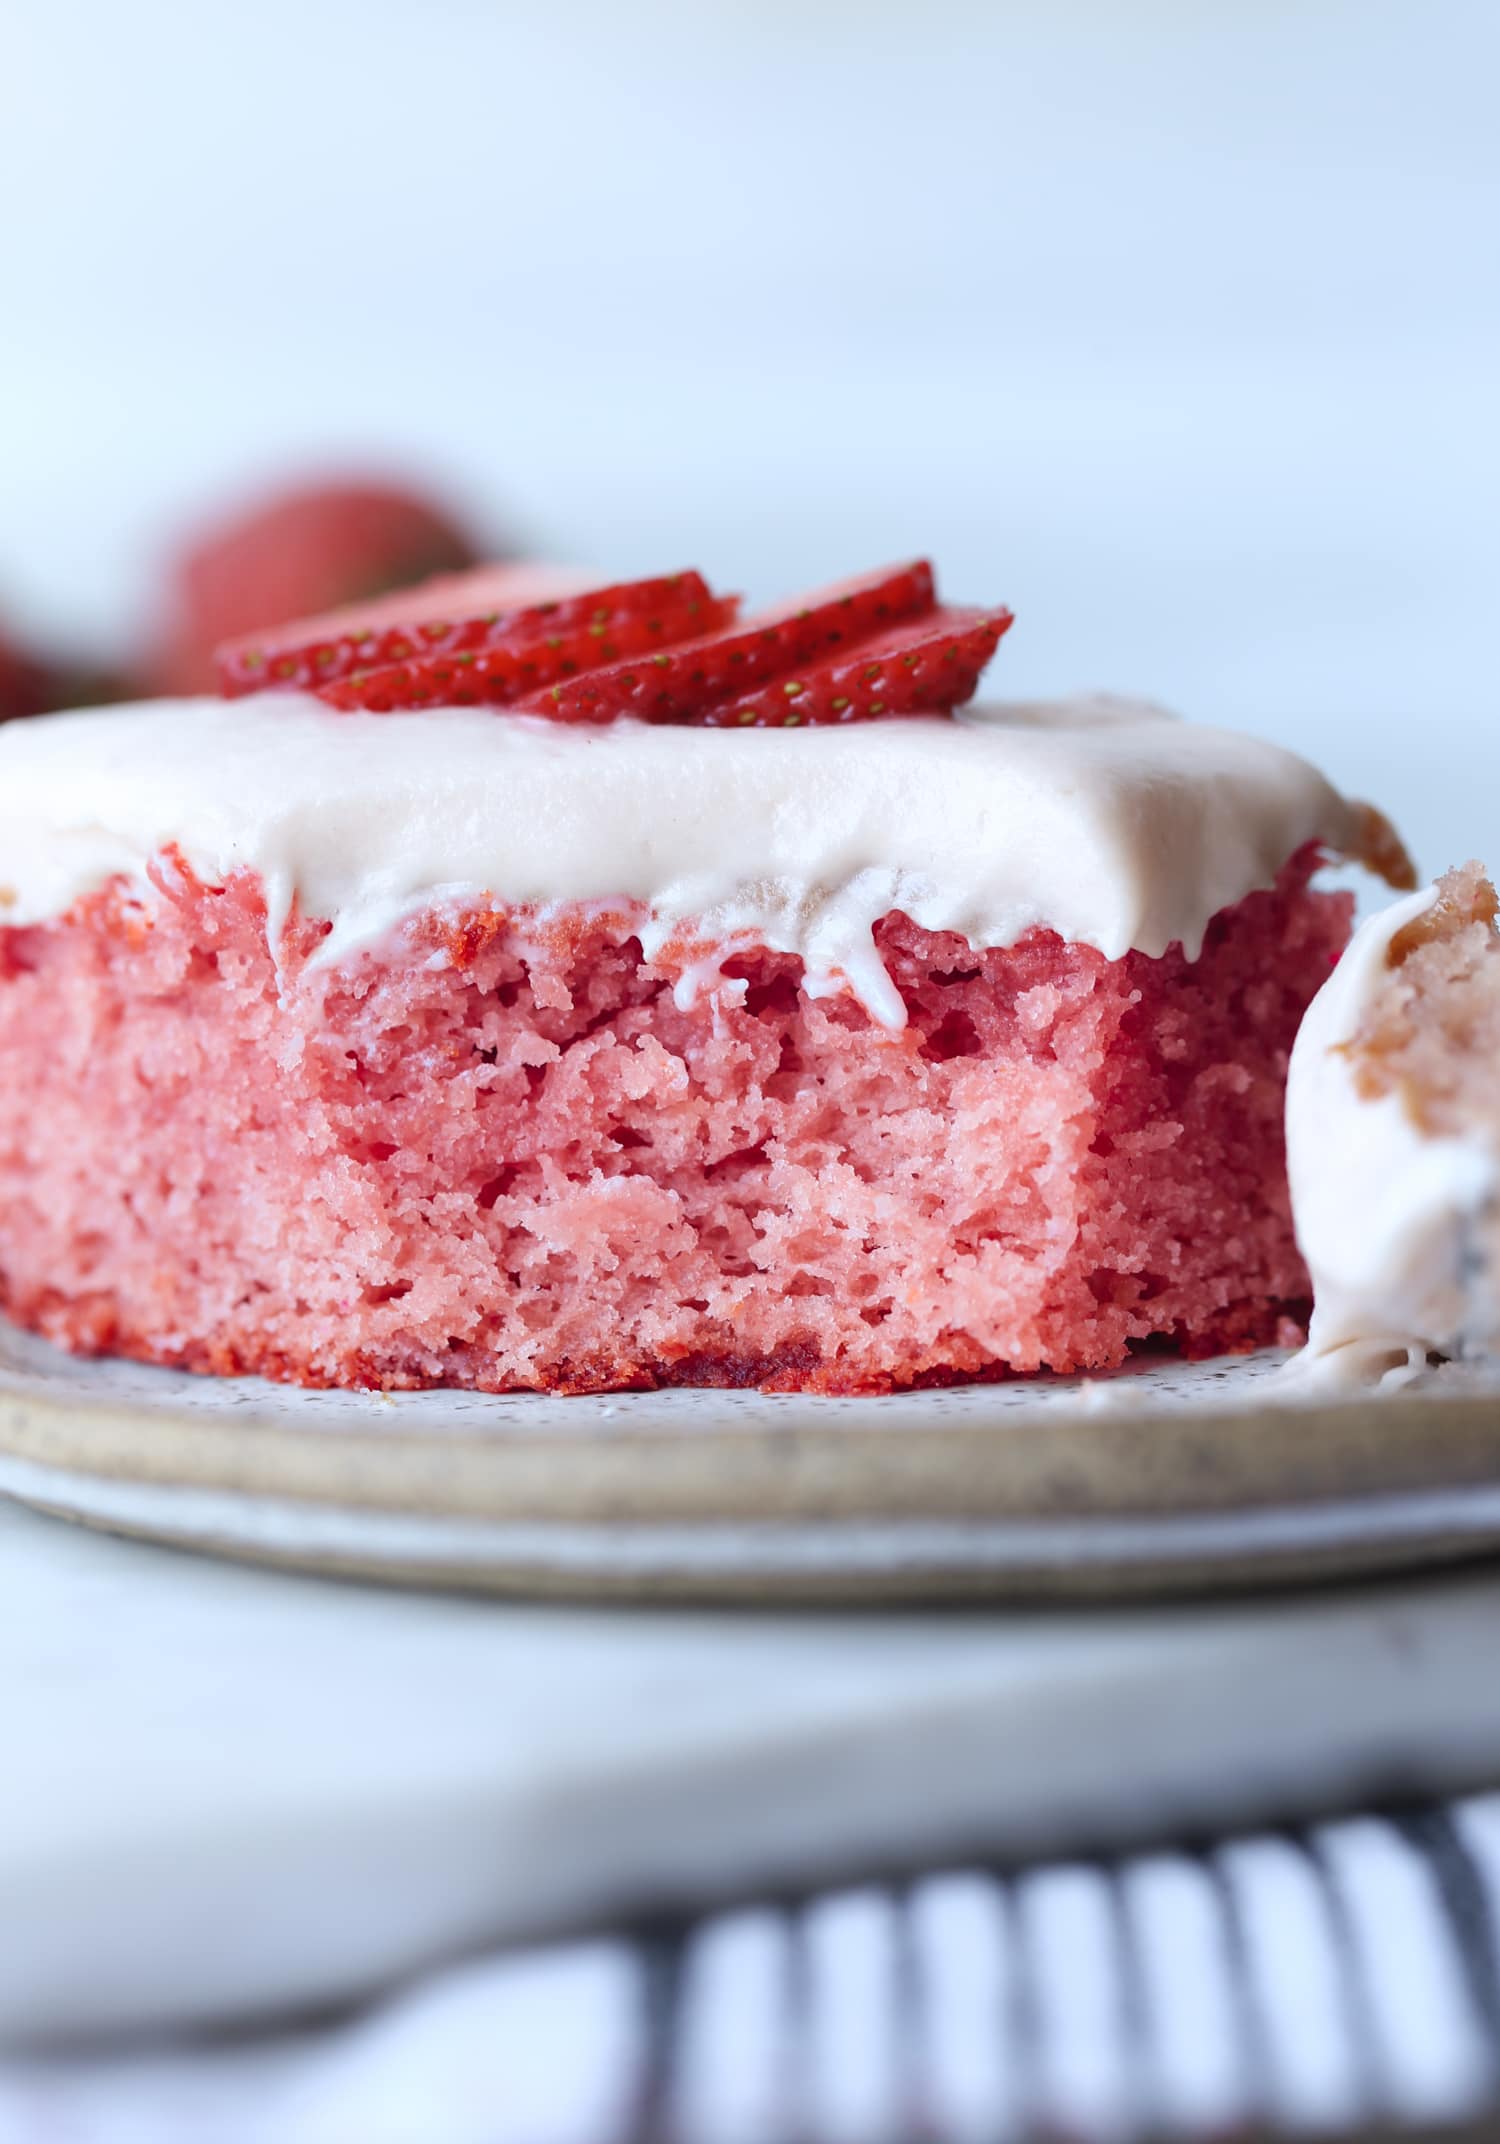 a slice of strawberry cake on a plate with a piece missing